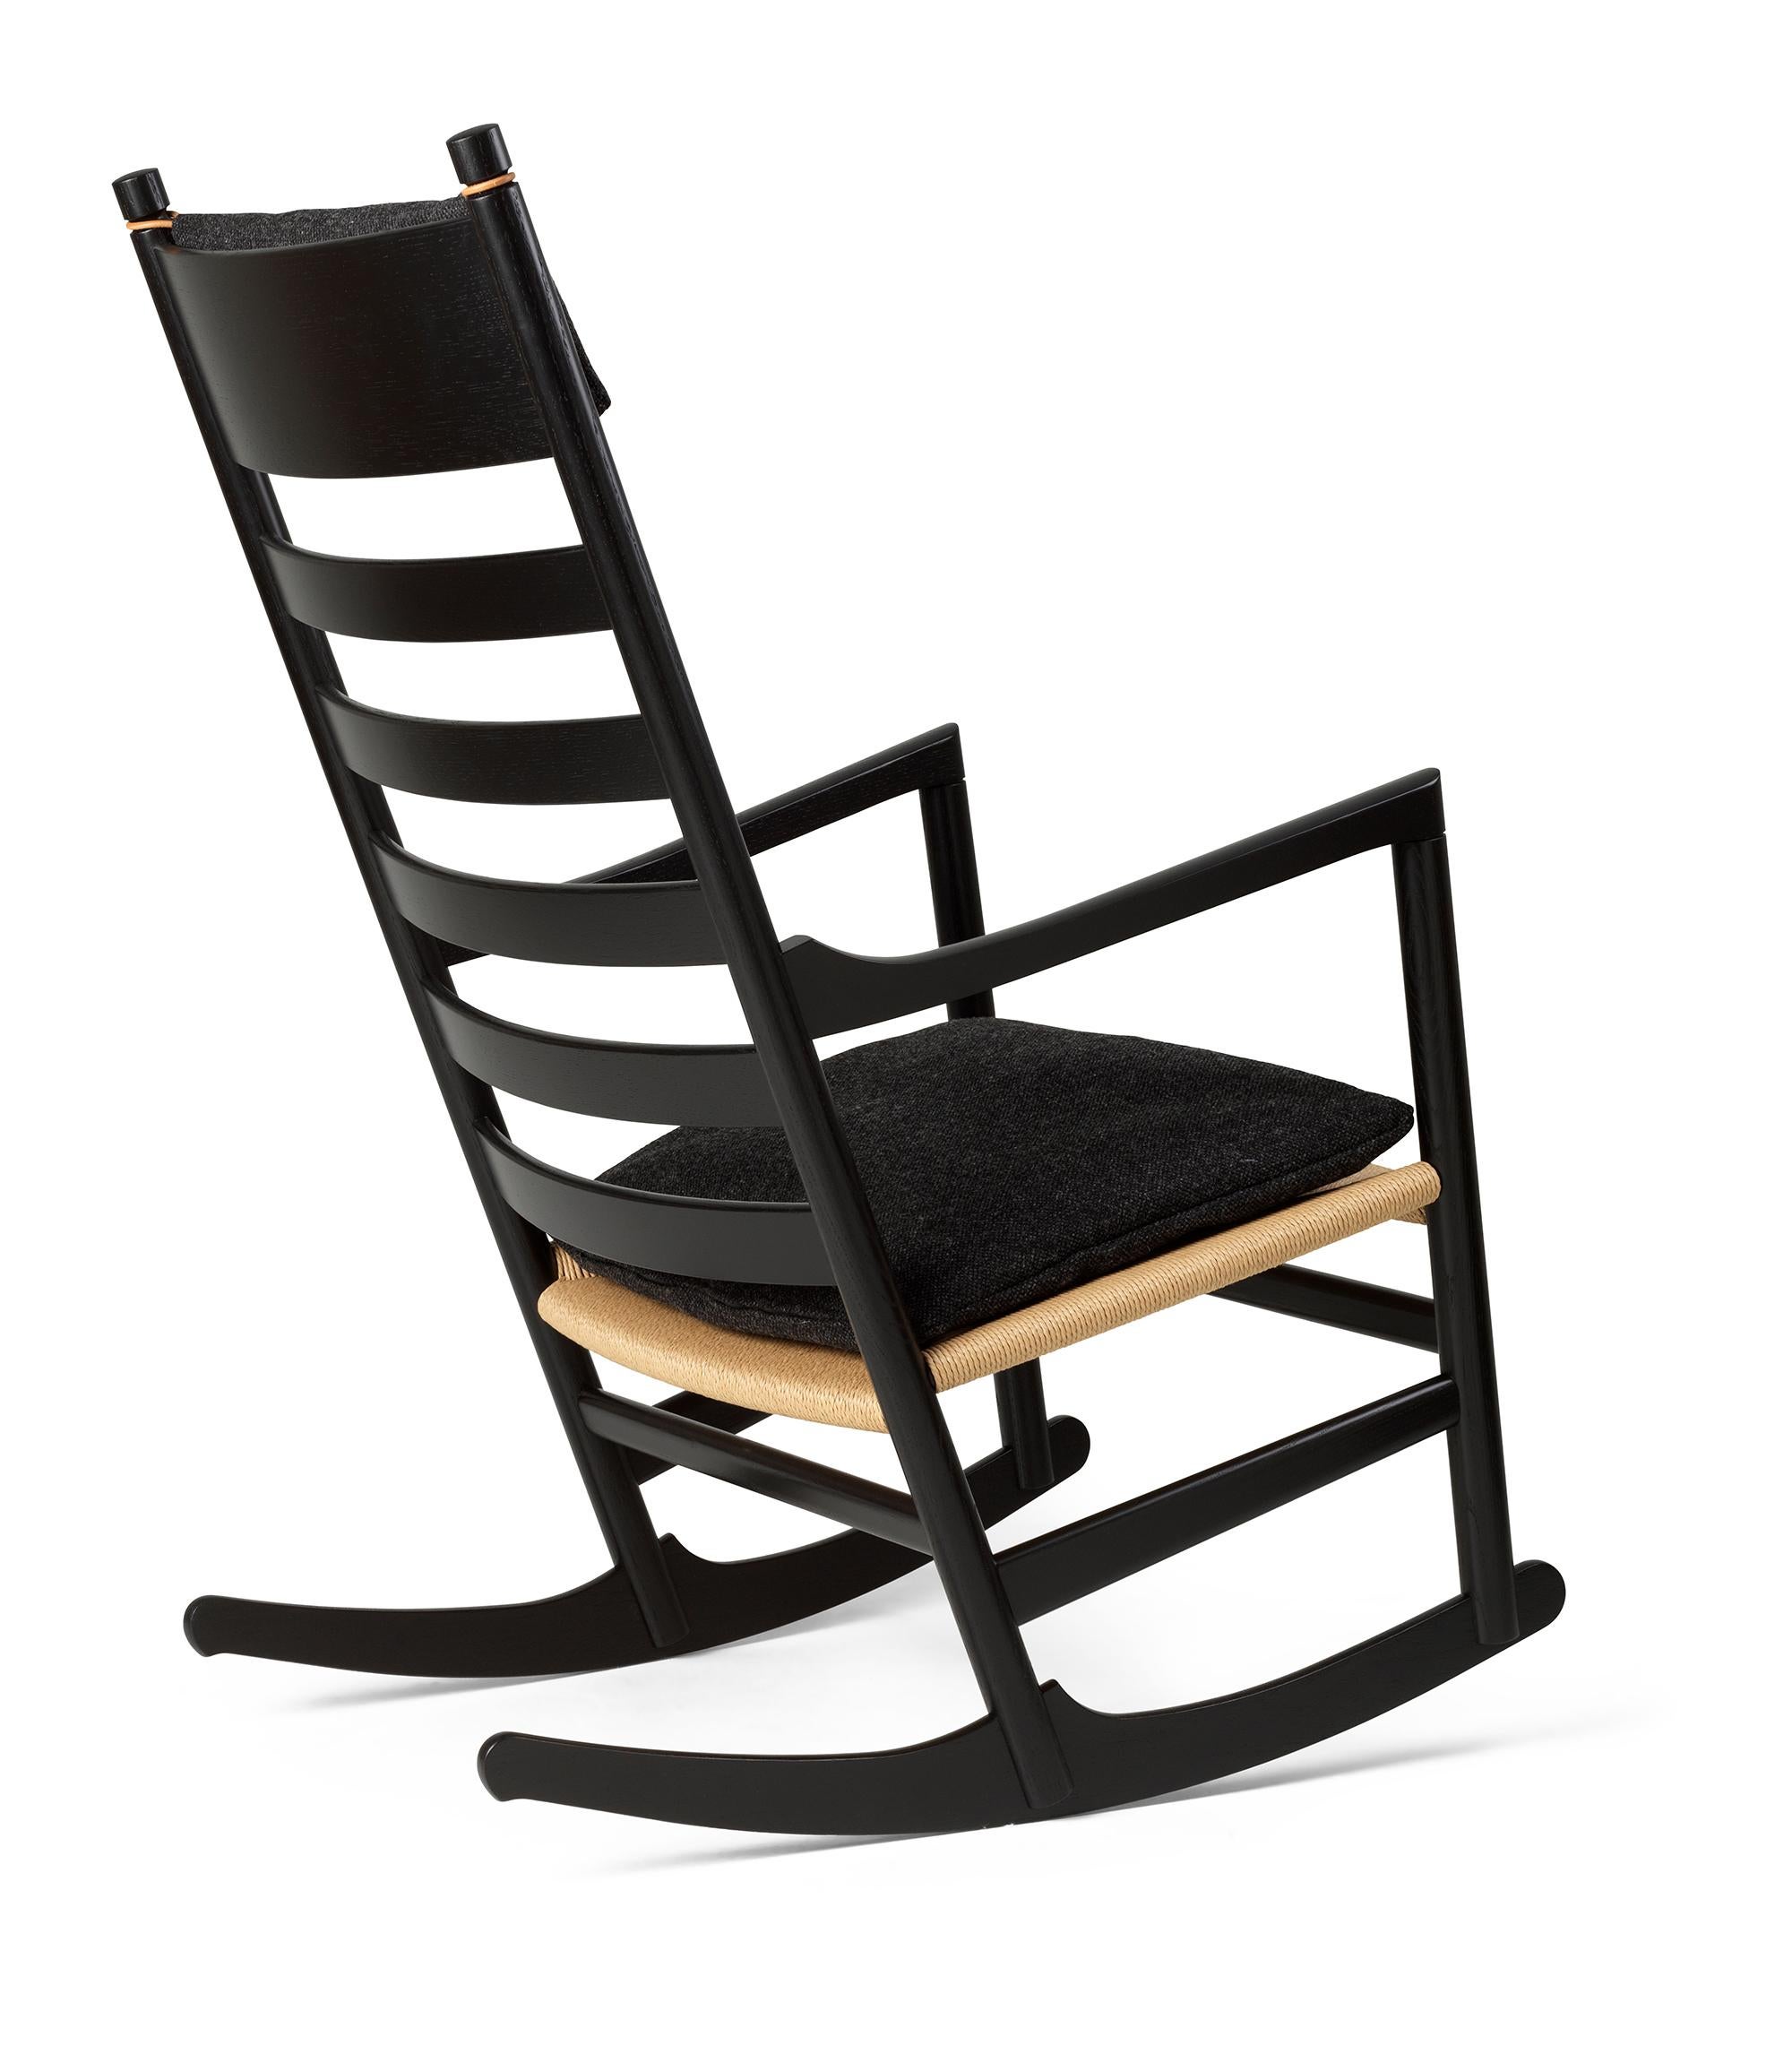 Hans J. Wegner 'CH45' Rocking Chair for Carl Hansen & Son in Black In New Condition For Sale In Glendale, CA